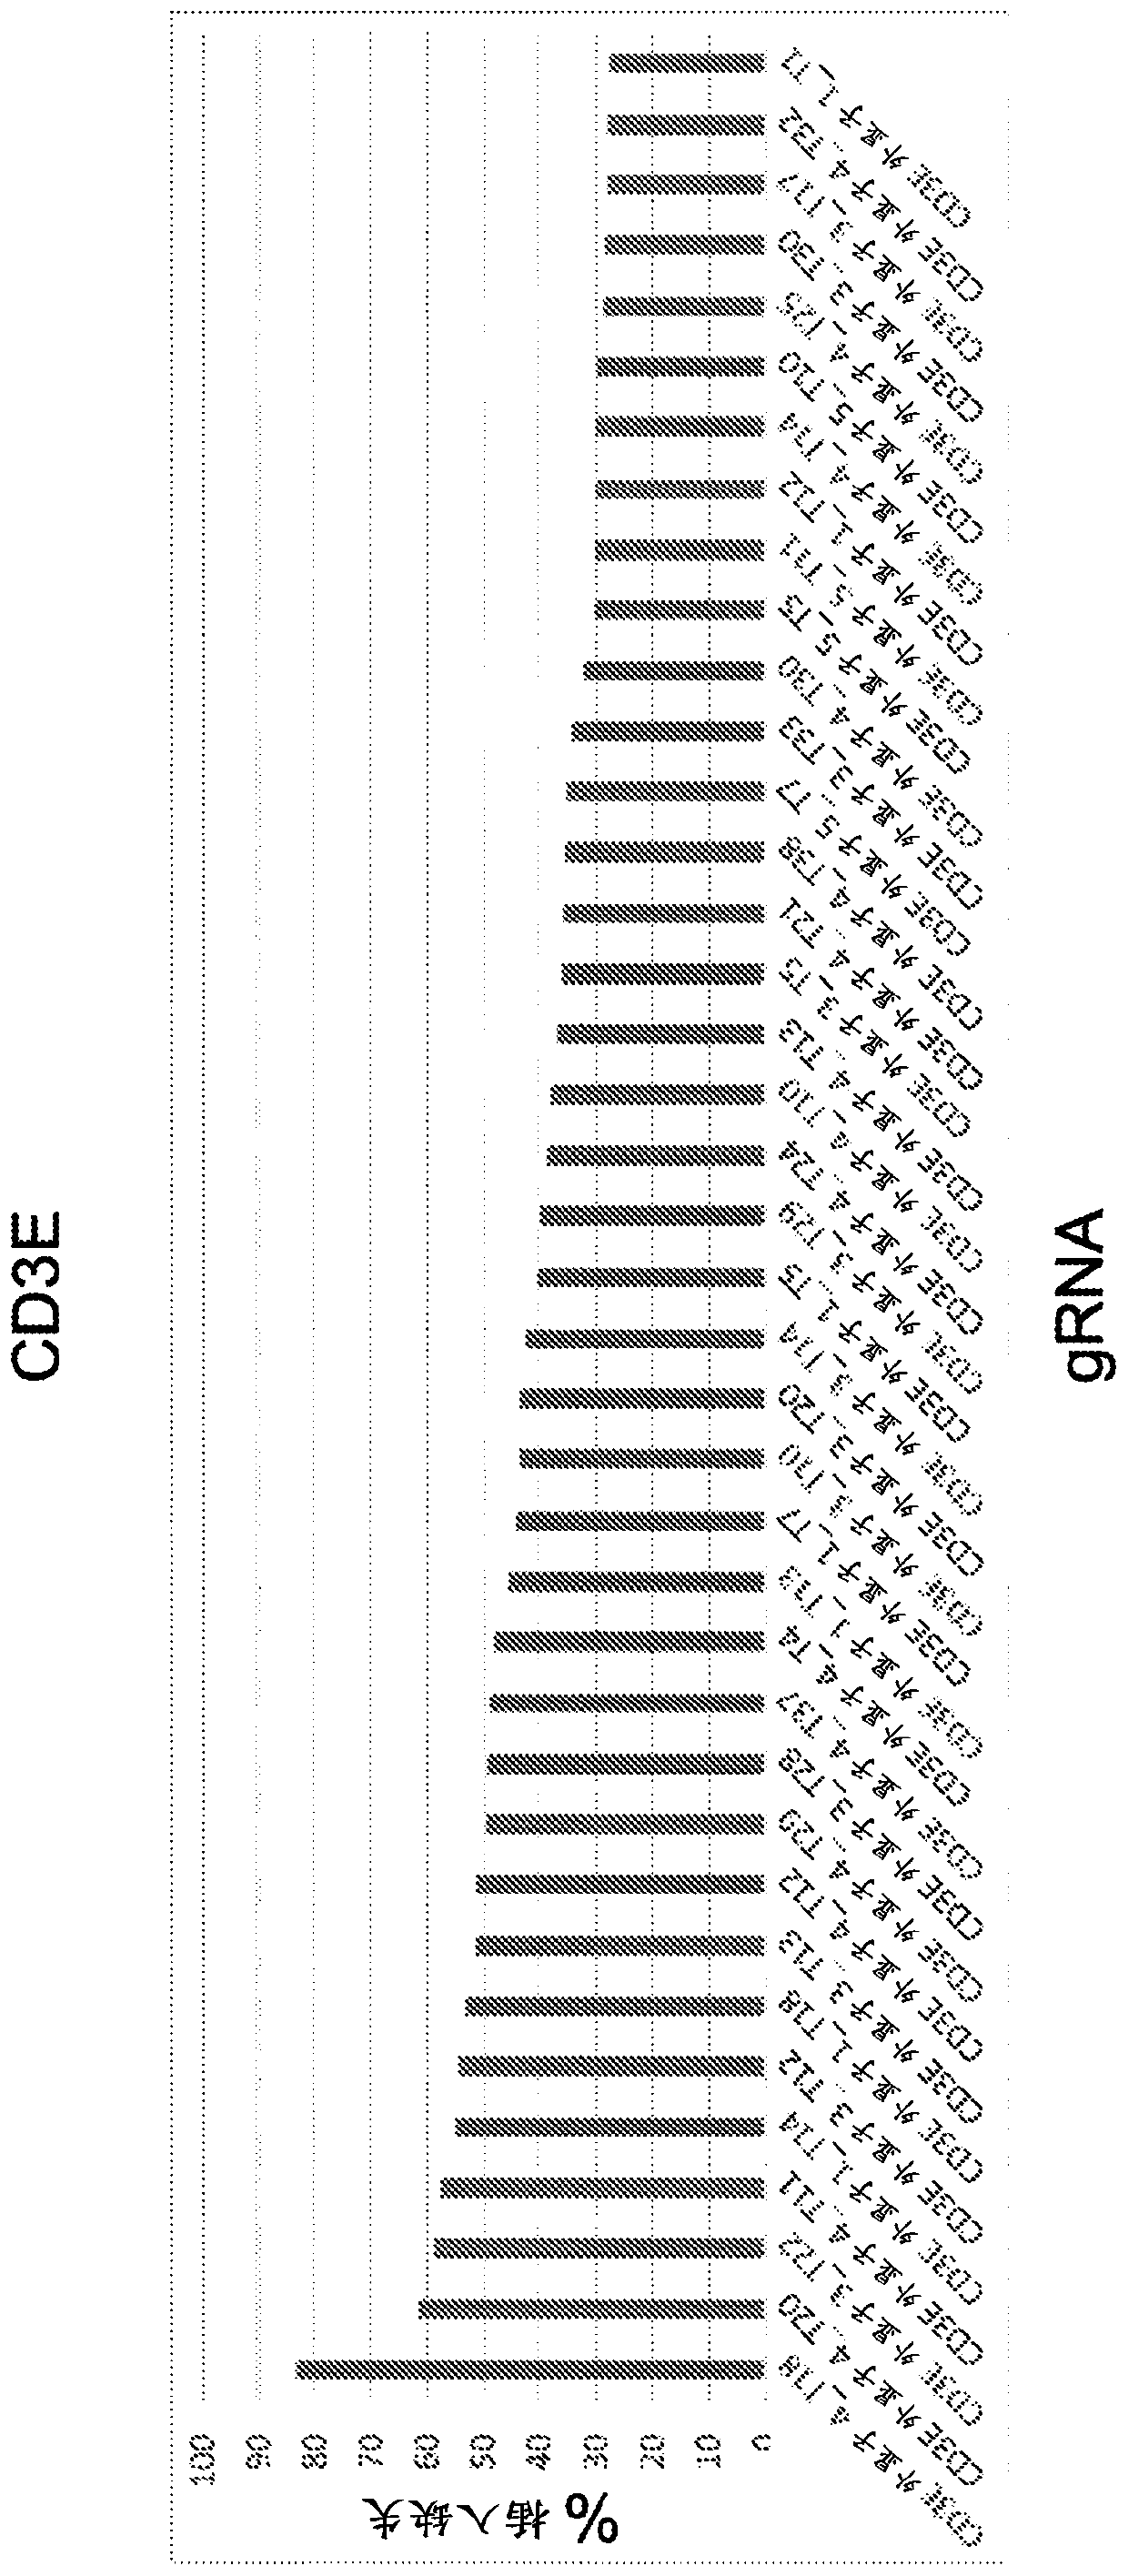 Materials and methods for engineering cells and uses thereof in immuno-oncology